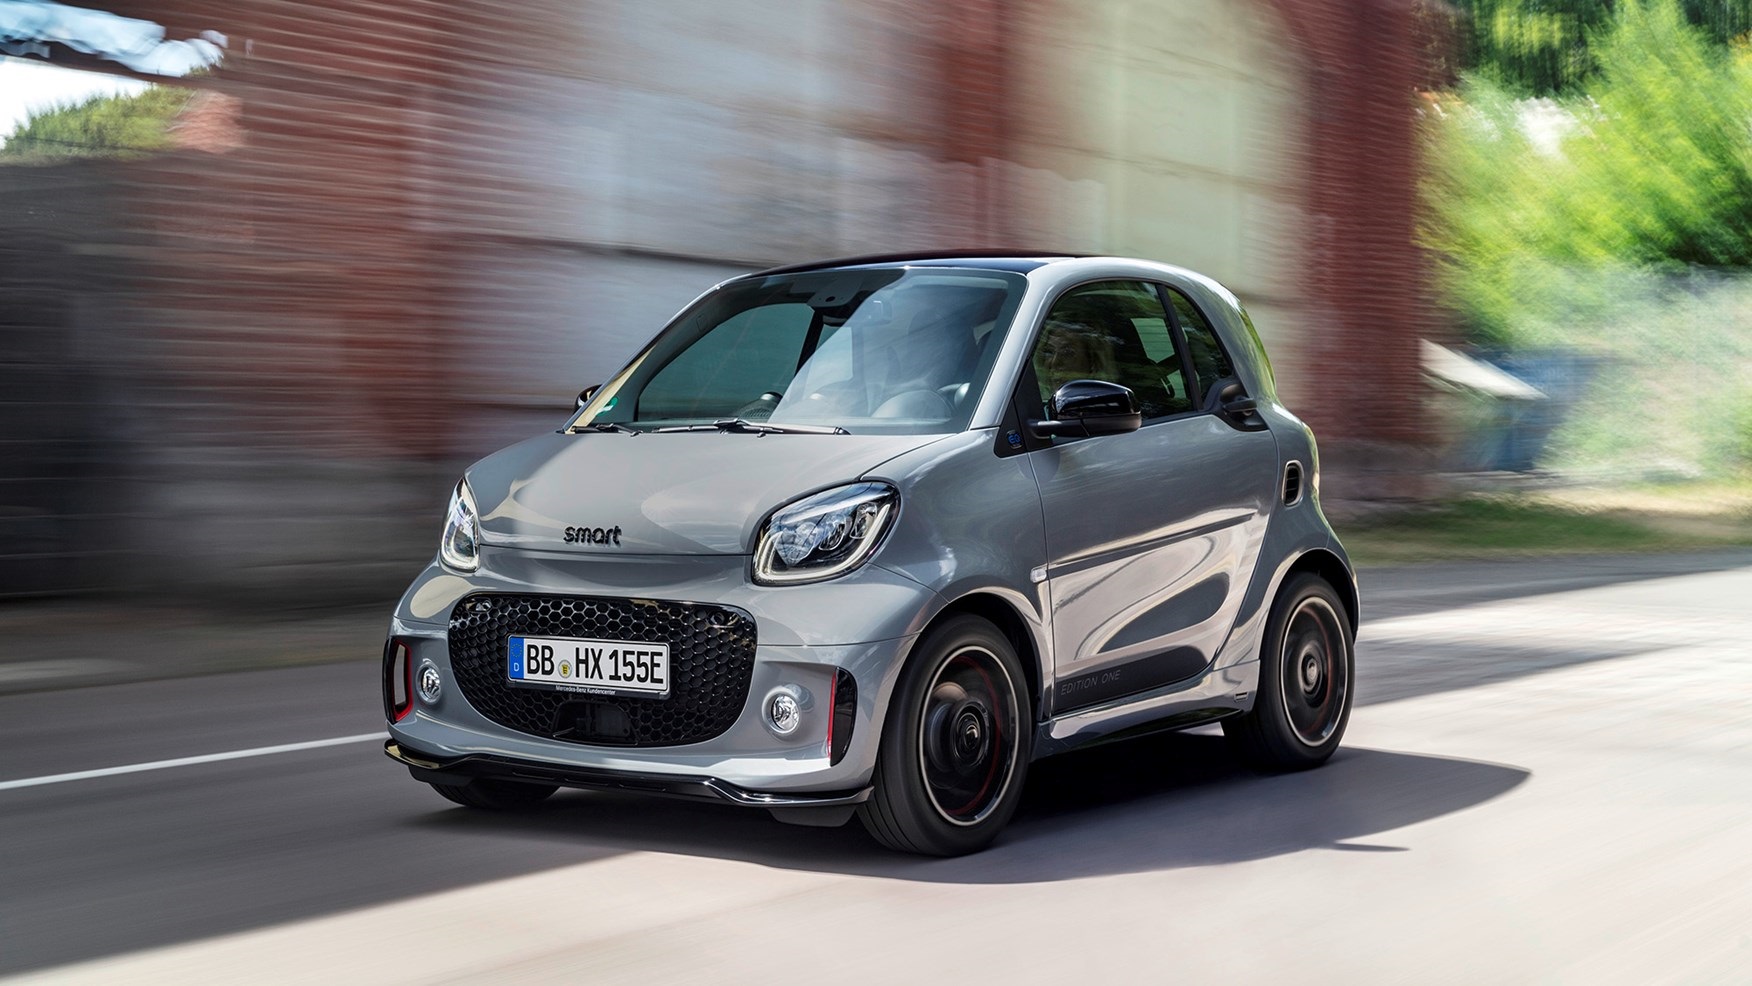 Smart Fortwo EQ via Just Lease